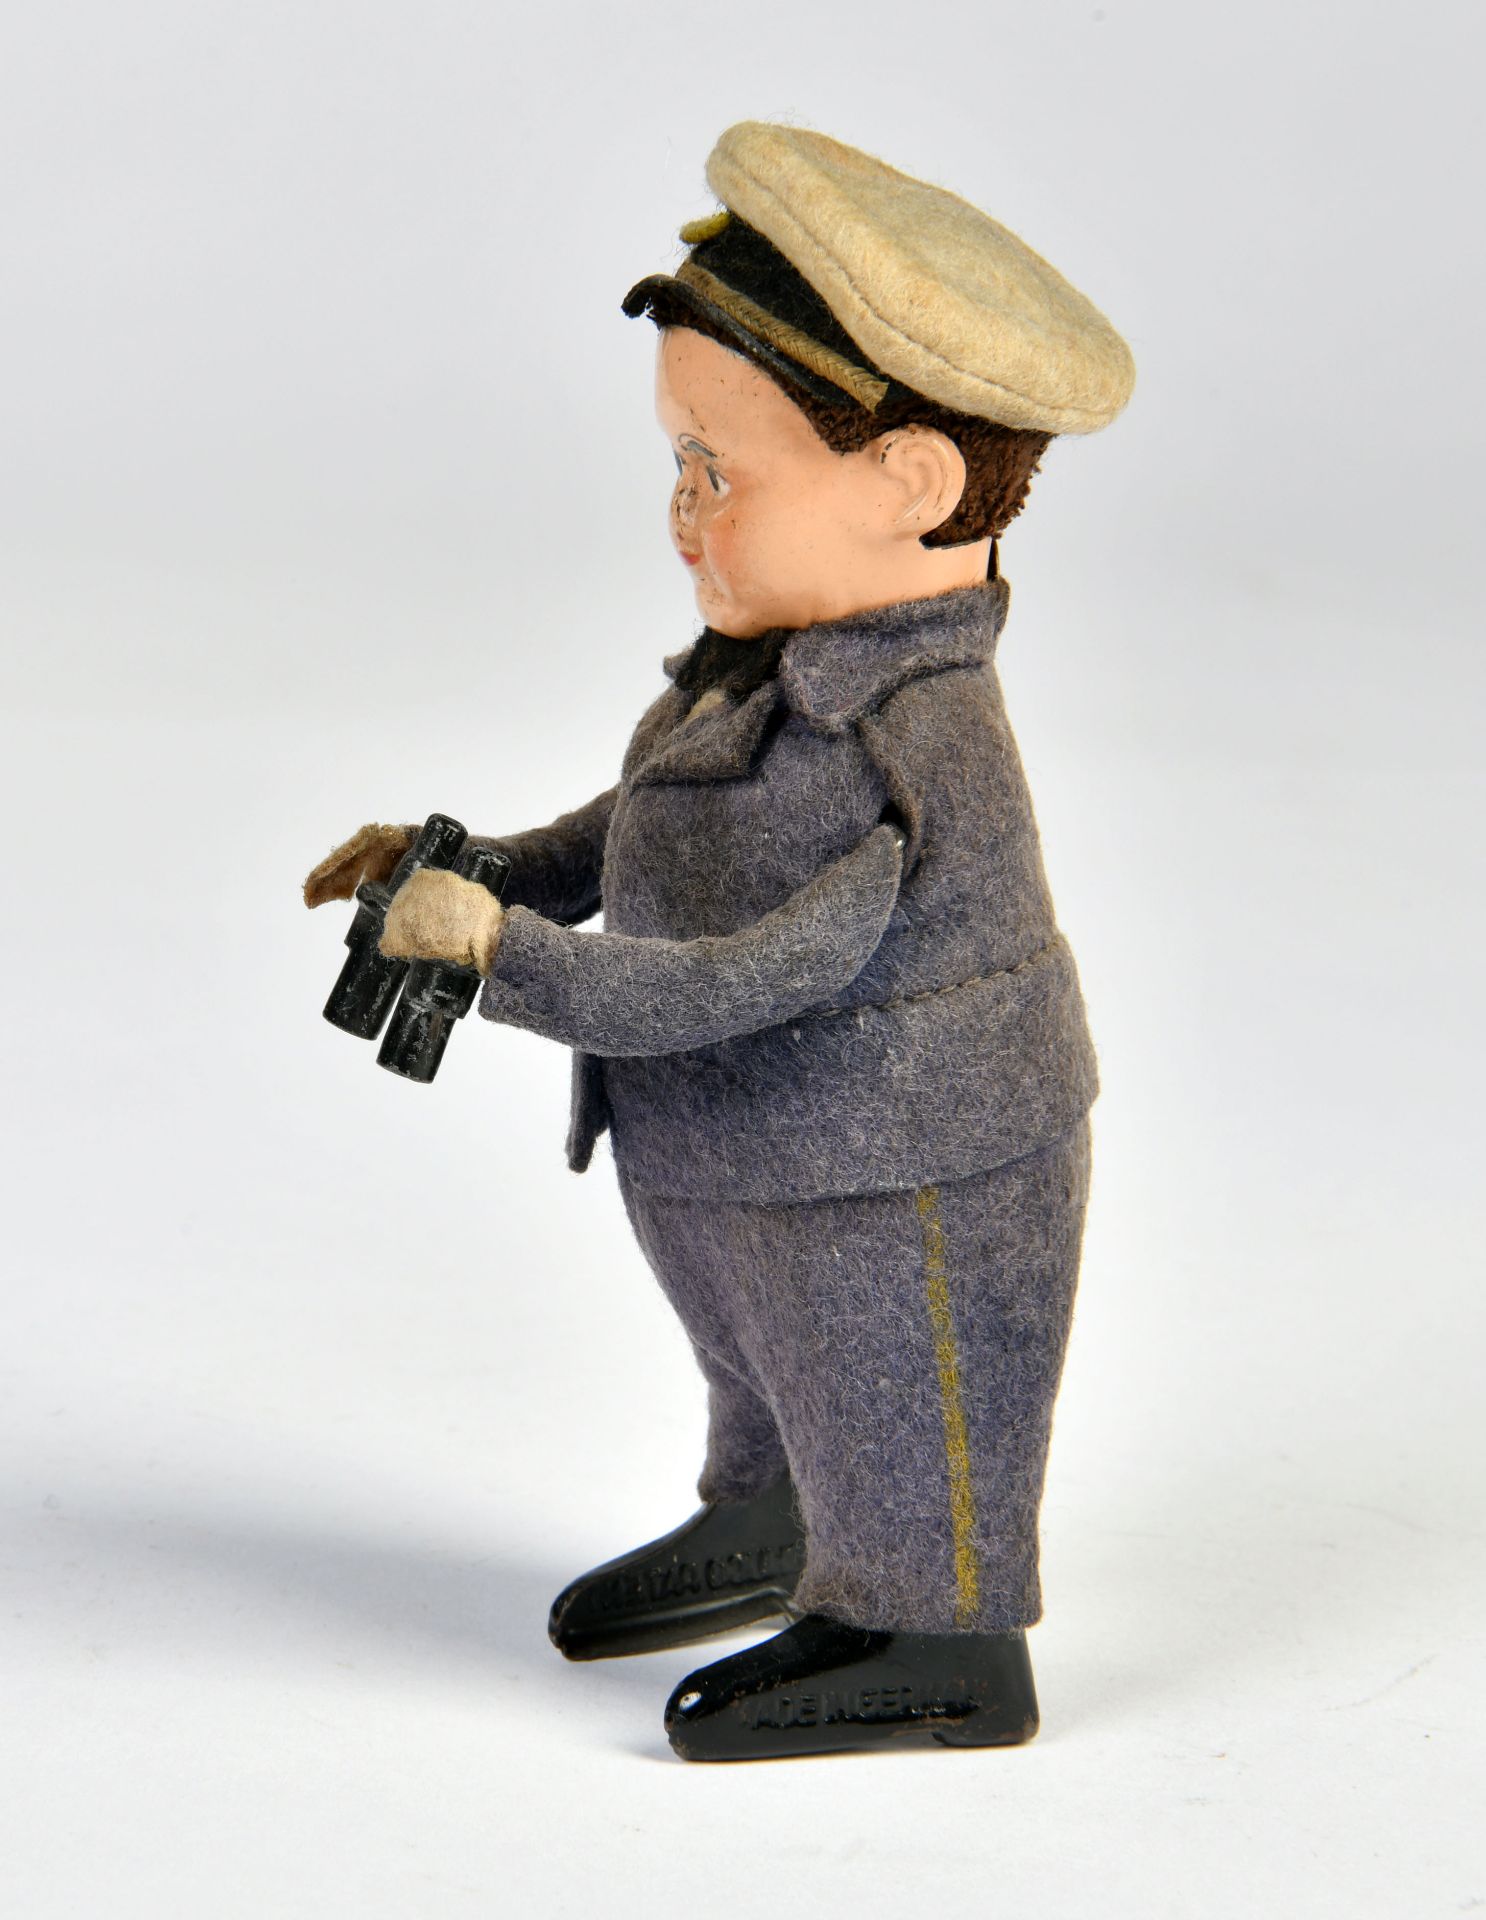 Schuco, captain with binoculars, Germany, cw ok, 13,5 cm, clothes dusty, C 2- - Image 2 of 2